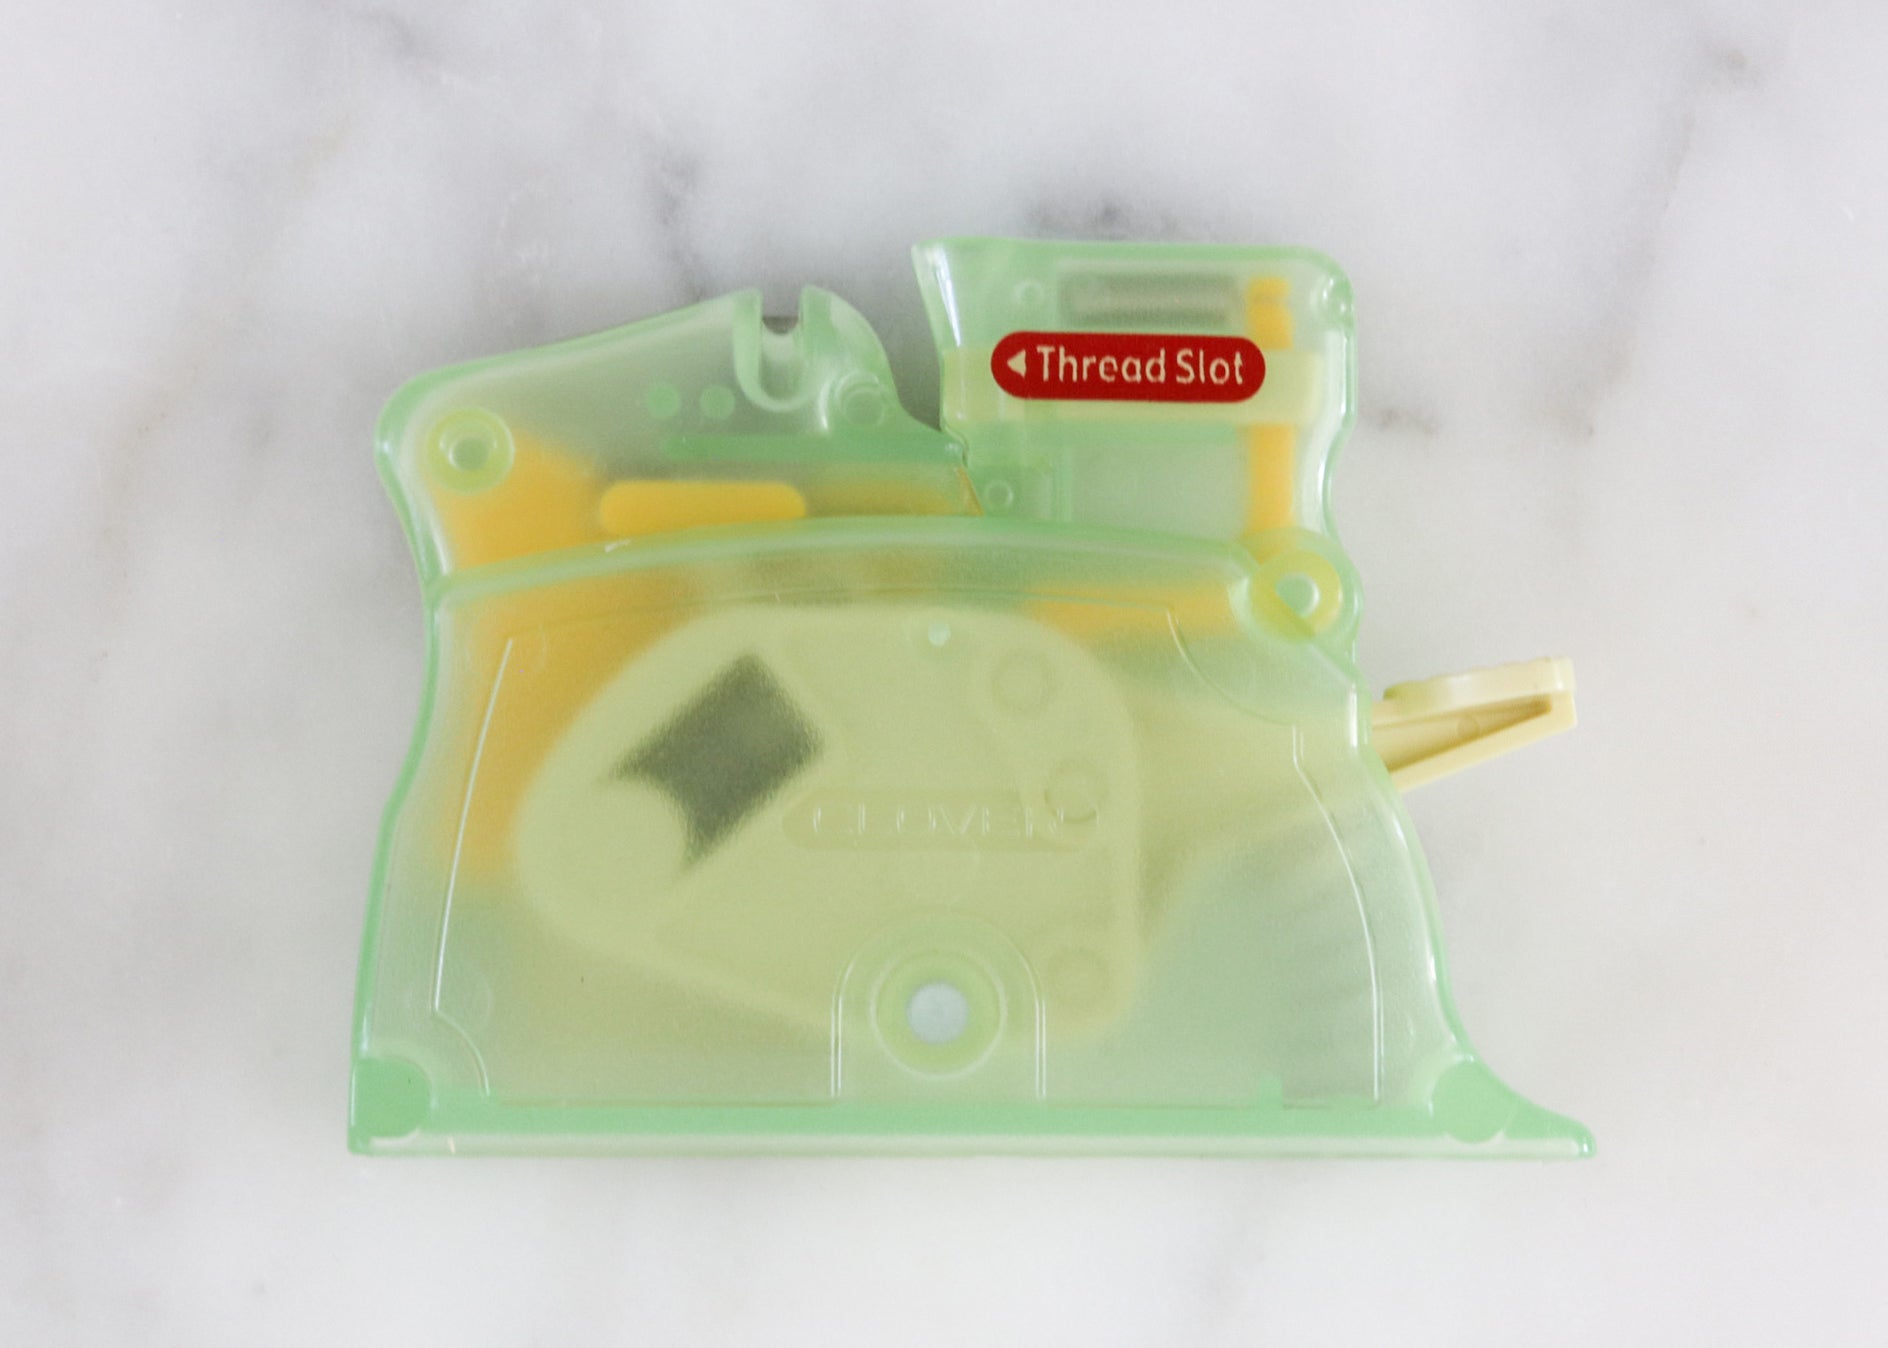 Clover Needle Threader with Cutter